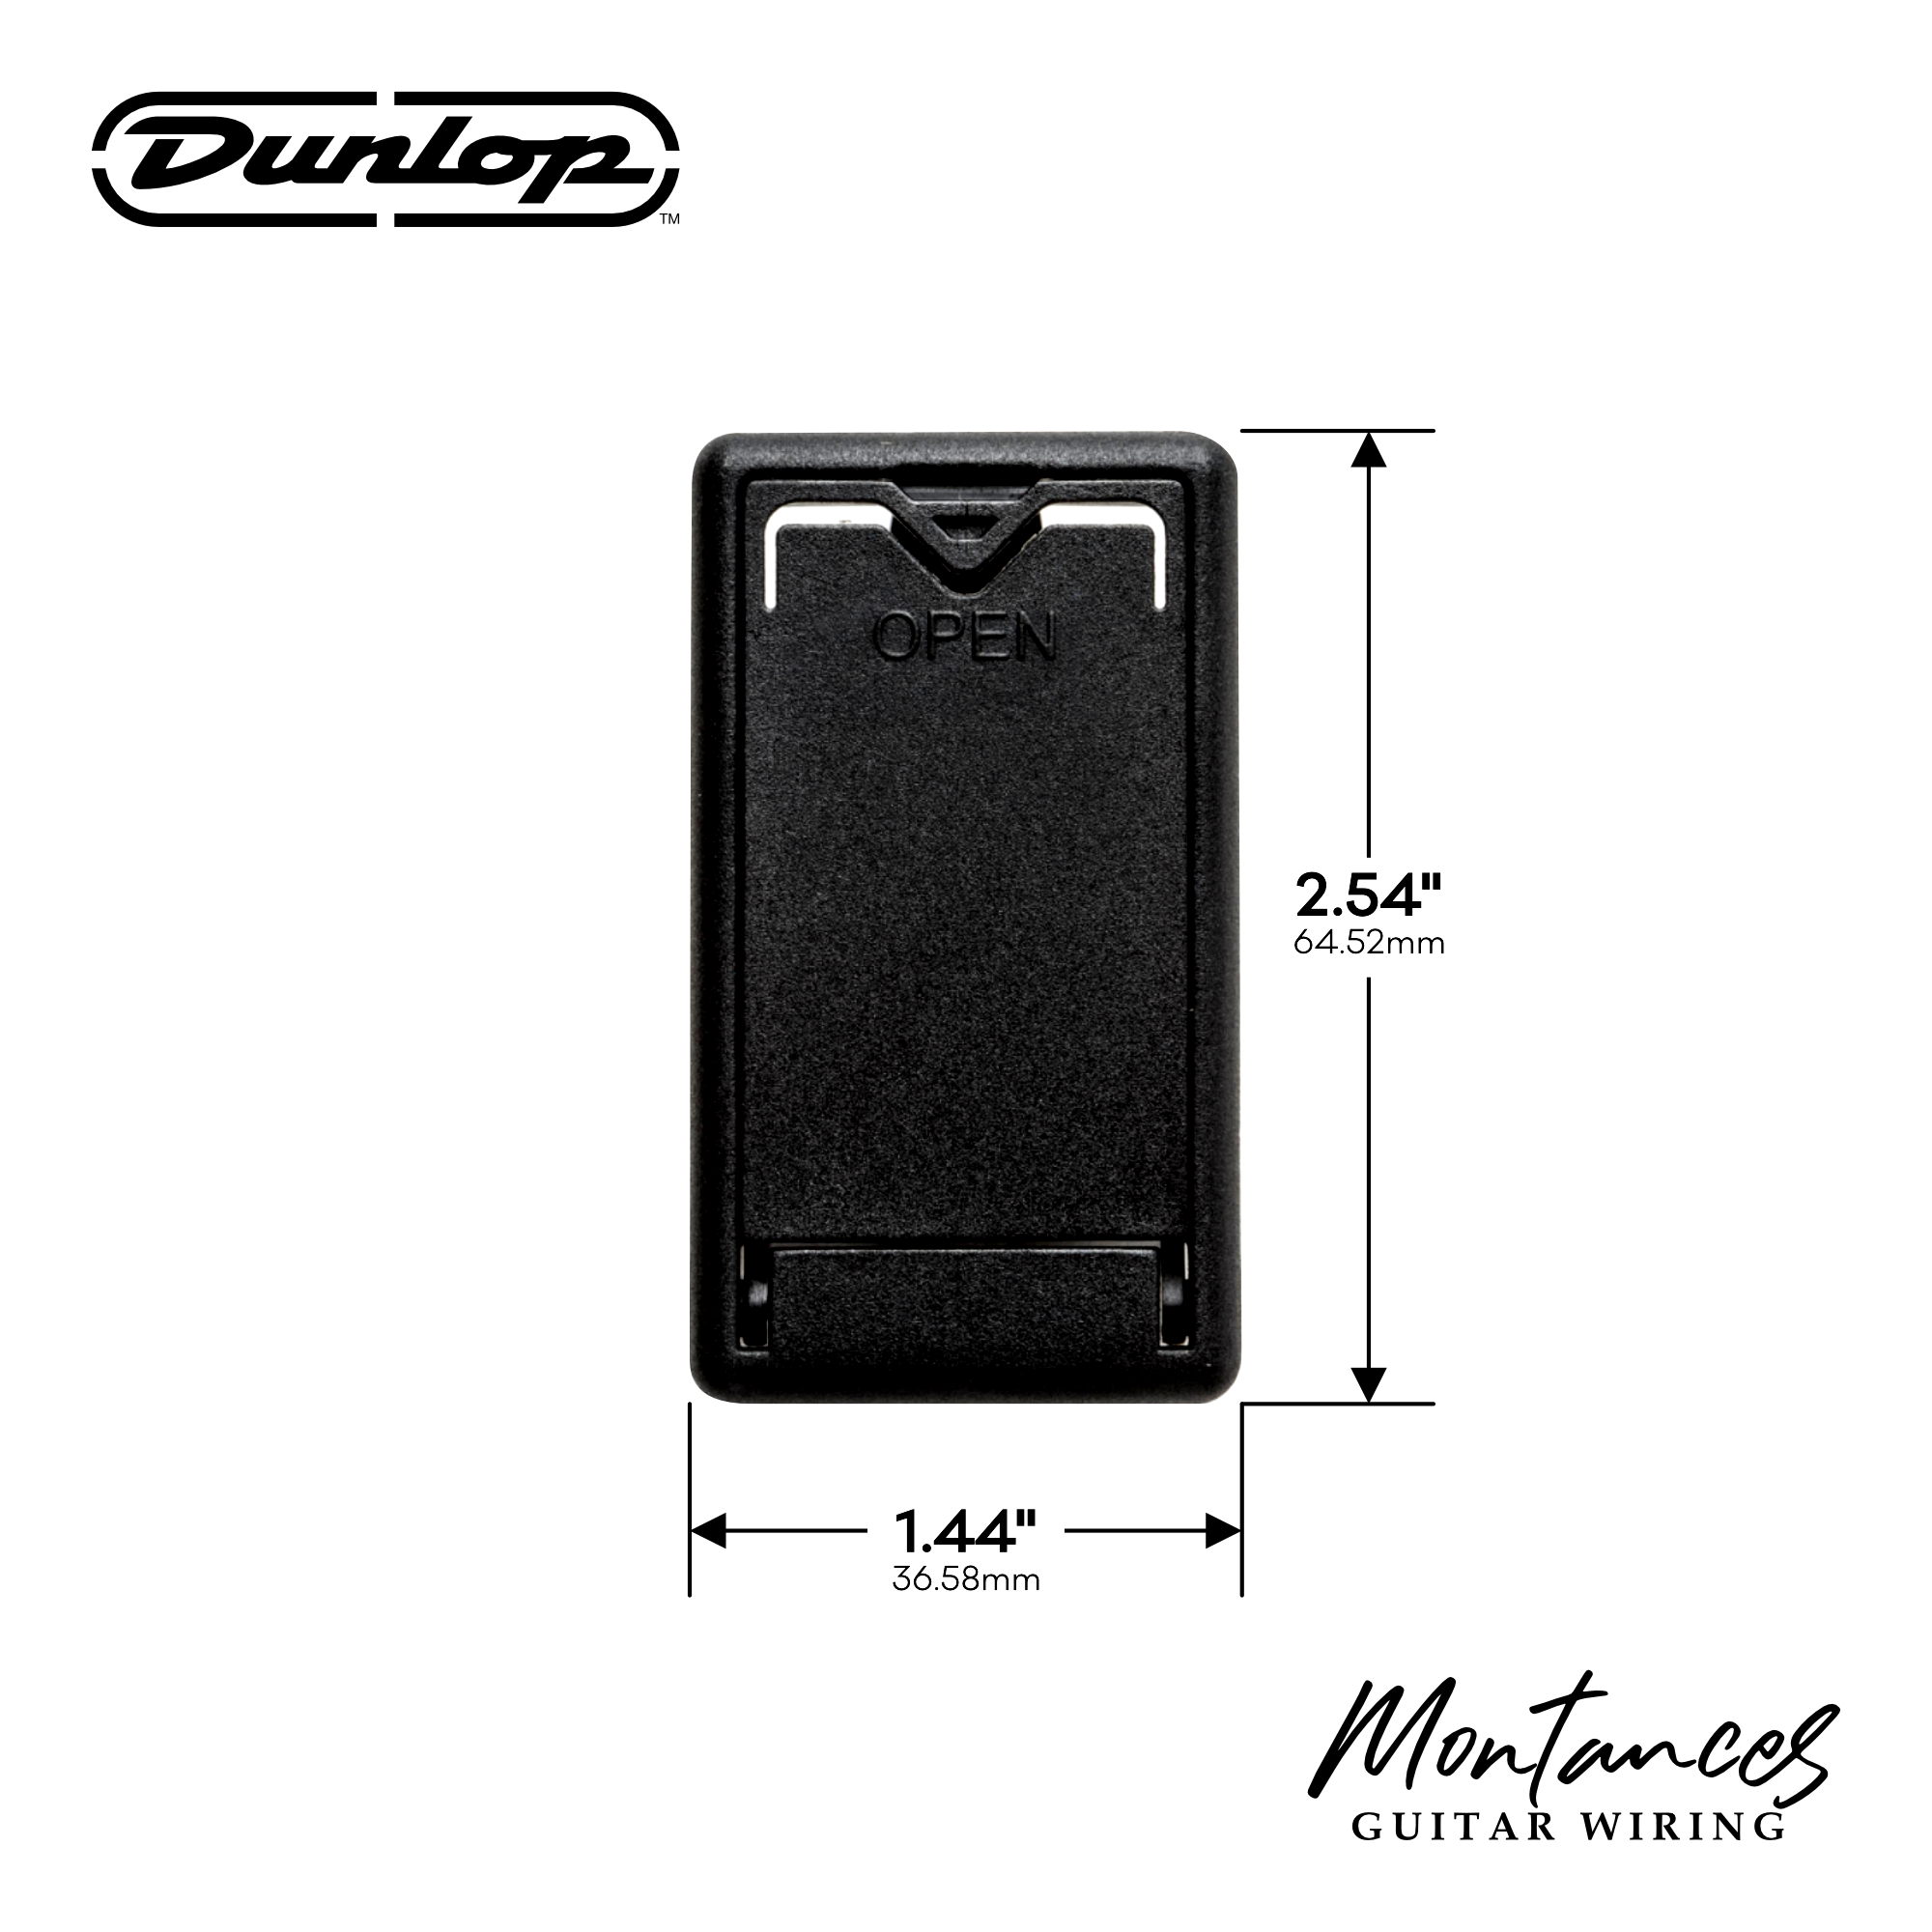 Dunlop Battery Box, snap-in enclosure